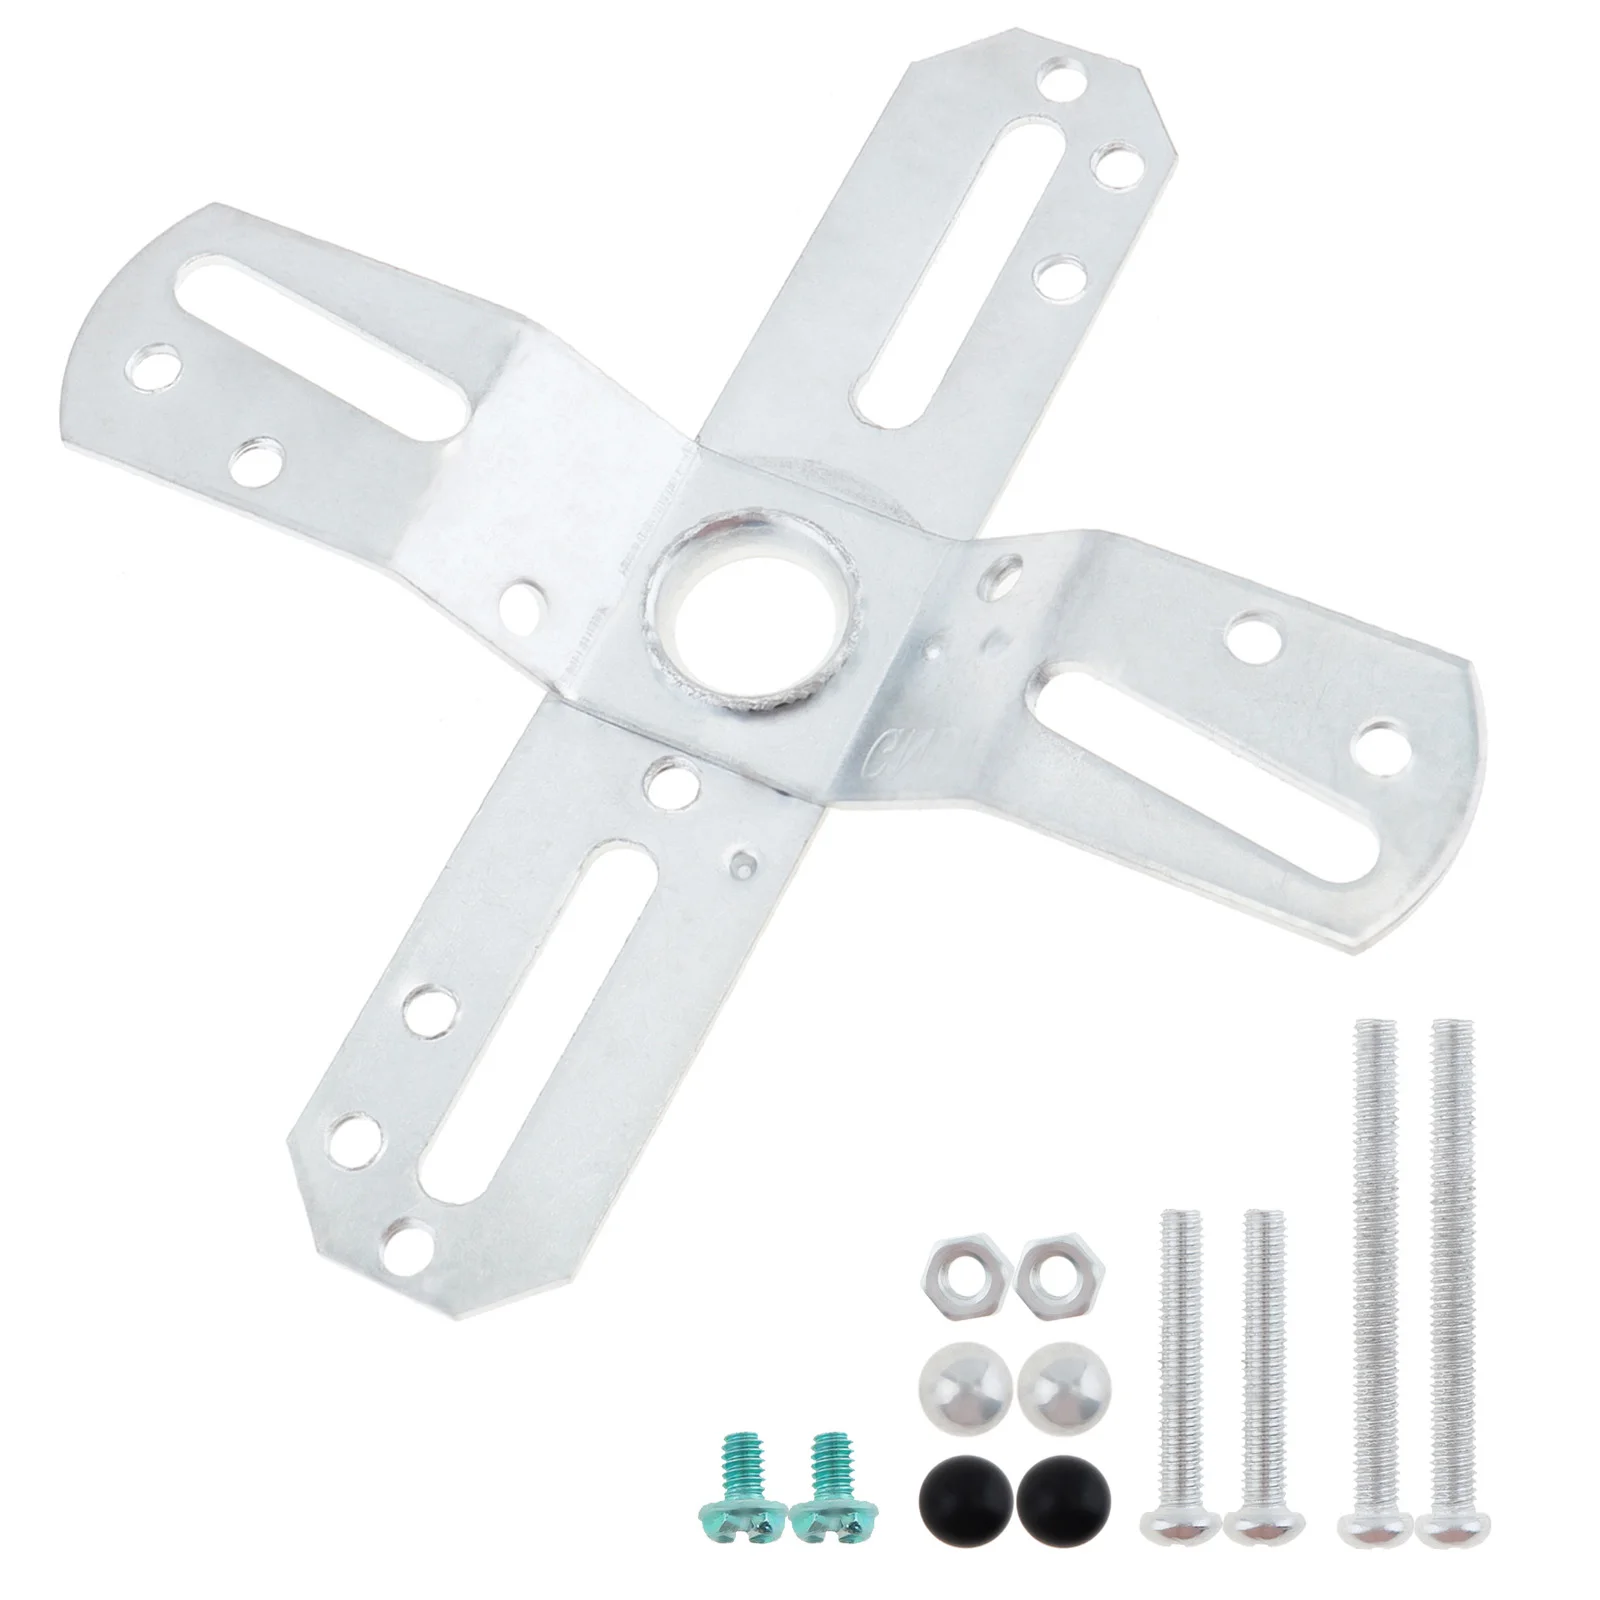 

Universal Rotatable Cross Shaped Light Fixture Crossbar Mounting Bracket with Screws Nuts for Wall Lamps / Pendant Lamps